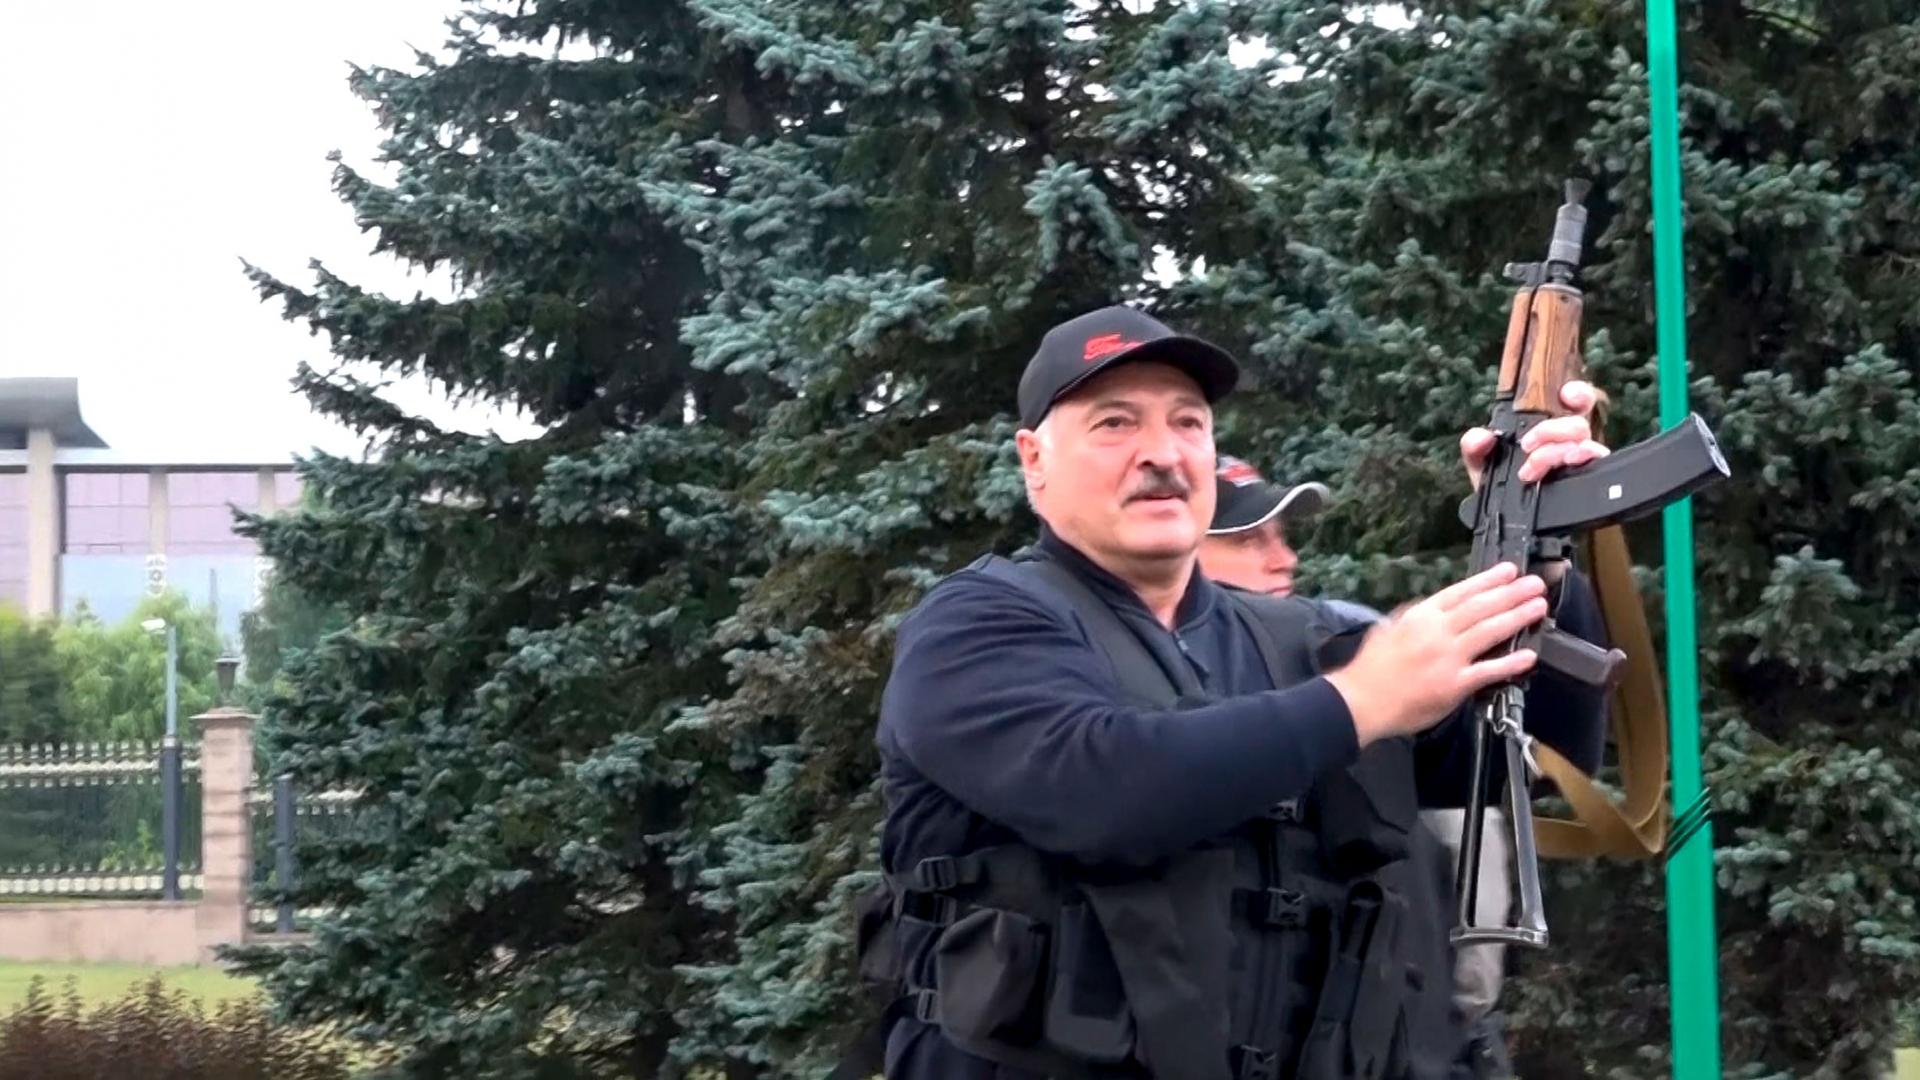 Alexander Lukashenko is shown wearing a hat and black vest while holding an assault rifle in the air.